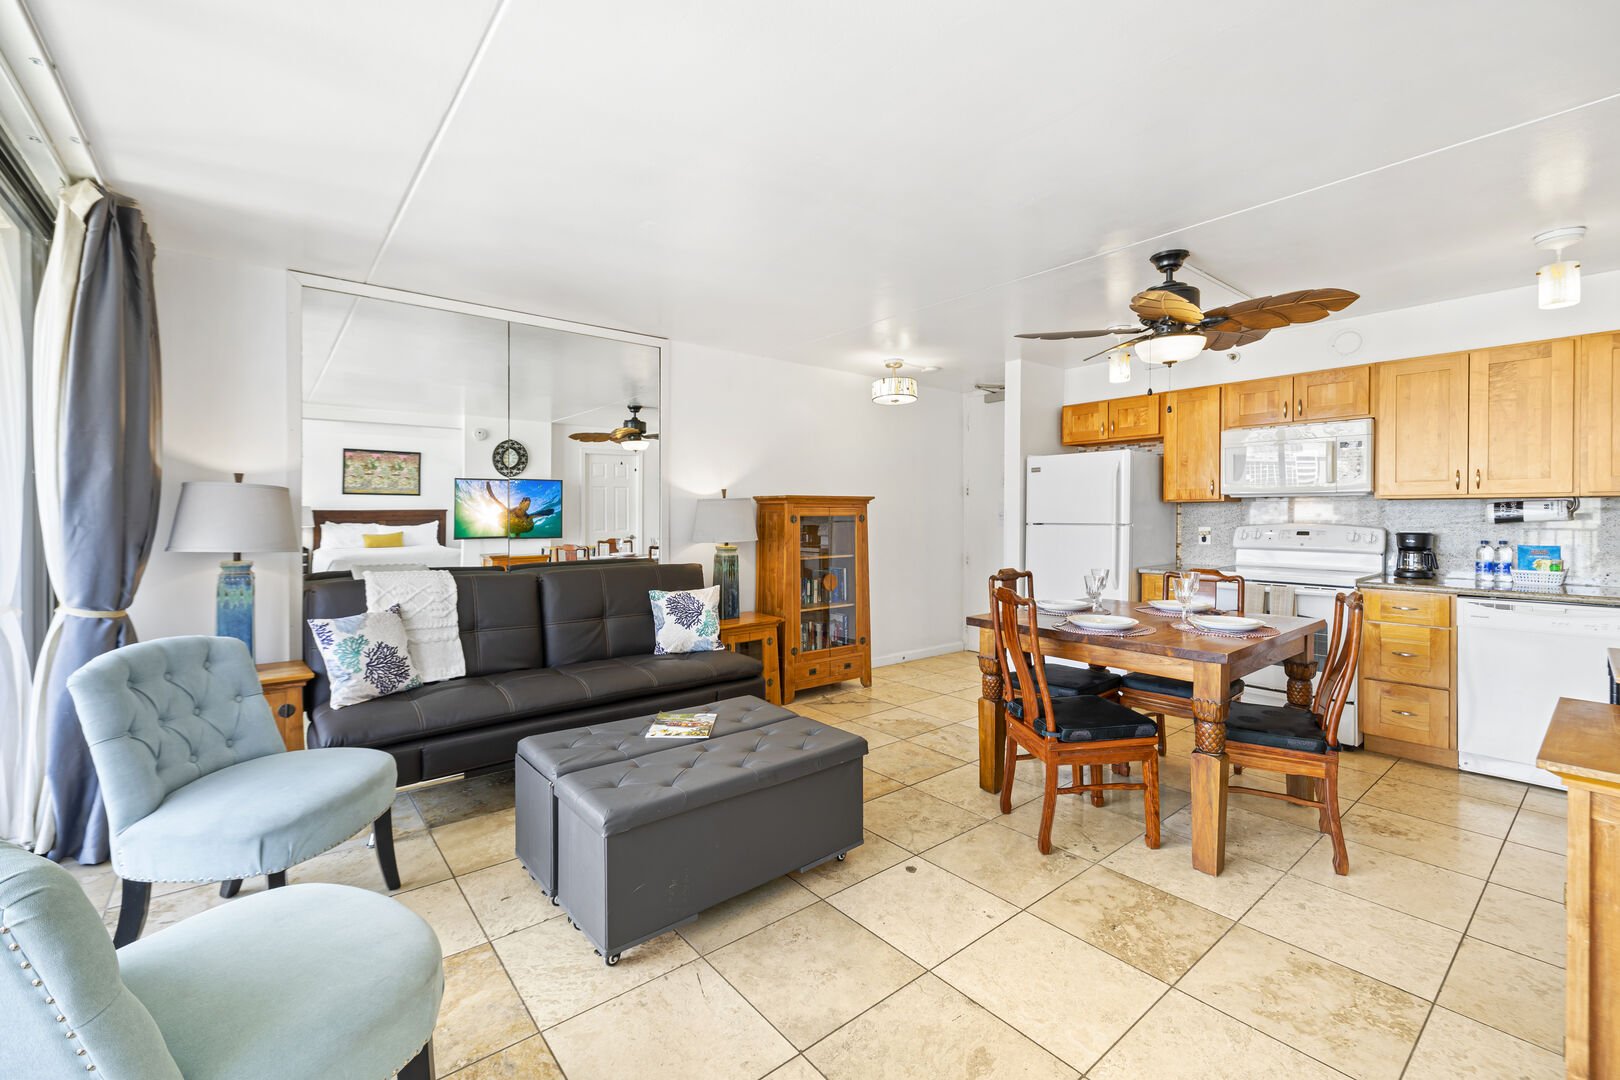 The living and dining area has a recliner sofa (for 1 person only), 2 chairs, a coffee table, and a dining table that can accommodate up to 4 guests!